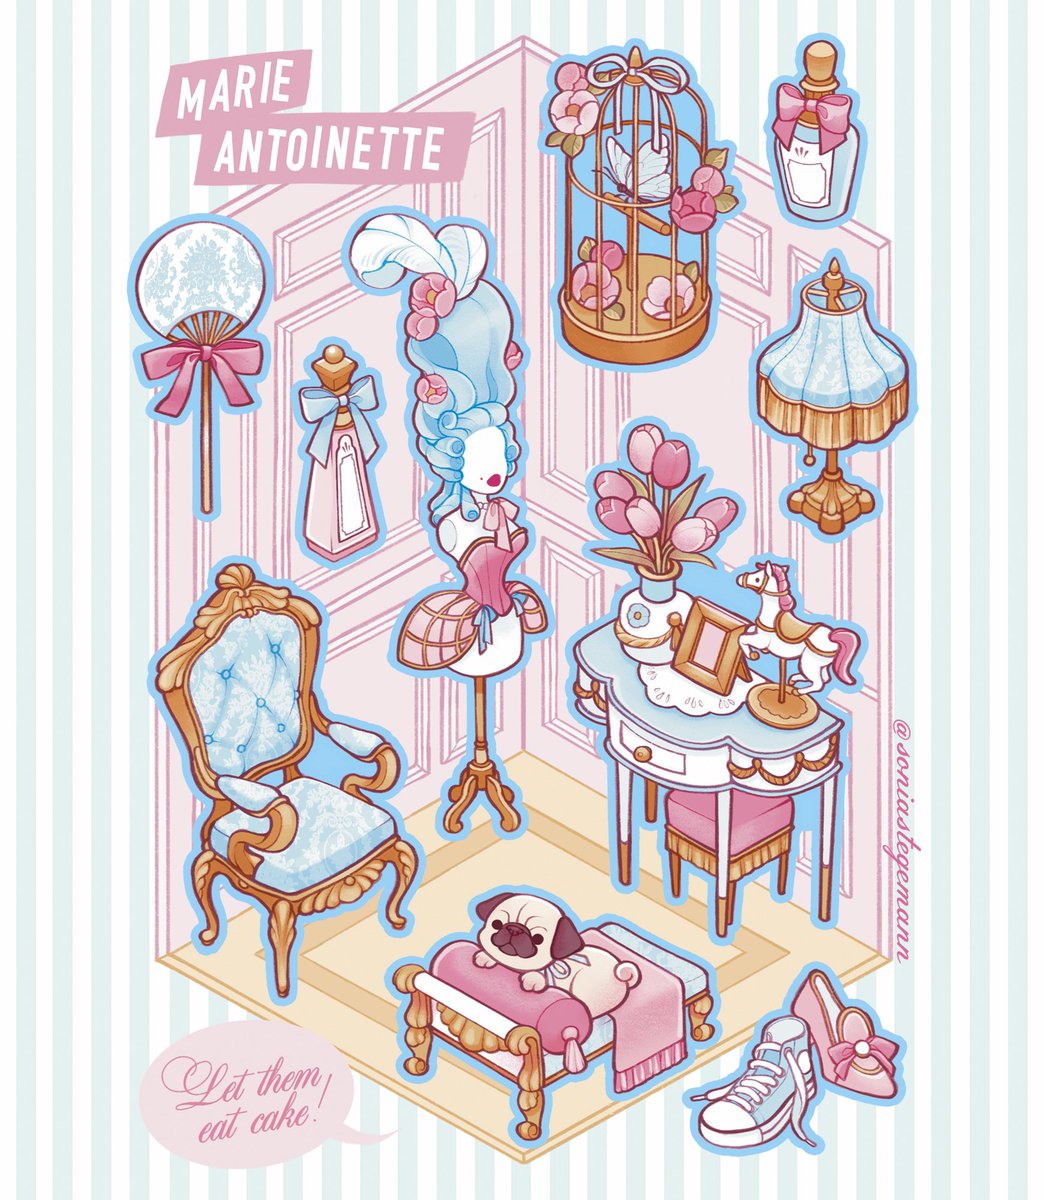 「Marie Antoinette sticker sheet」|💙sonia💙のイラスト